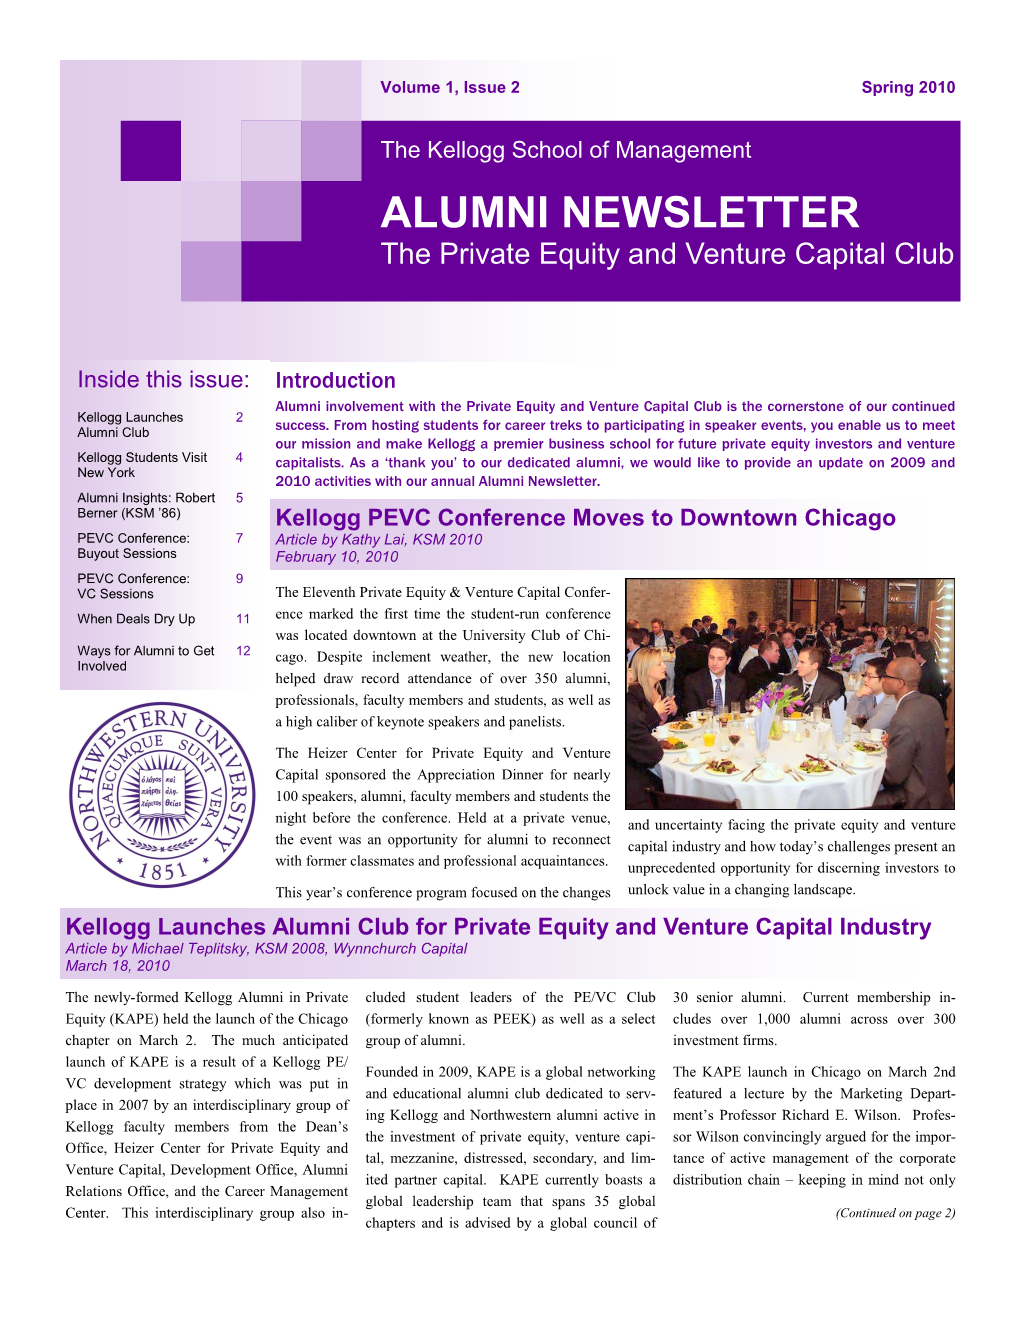 ALUMNI NEWSLETTER the Private Equity and Venture Capital Club